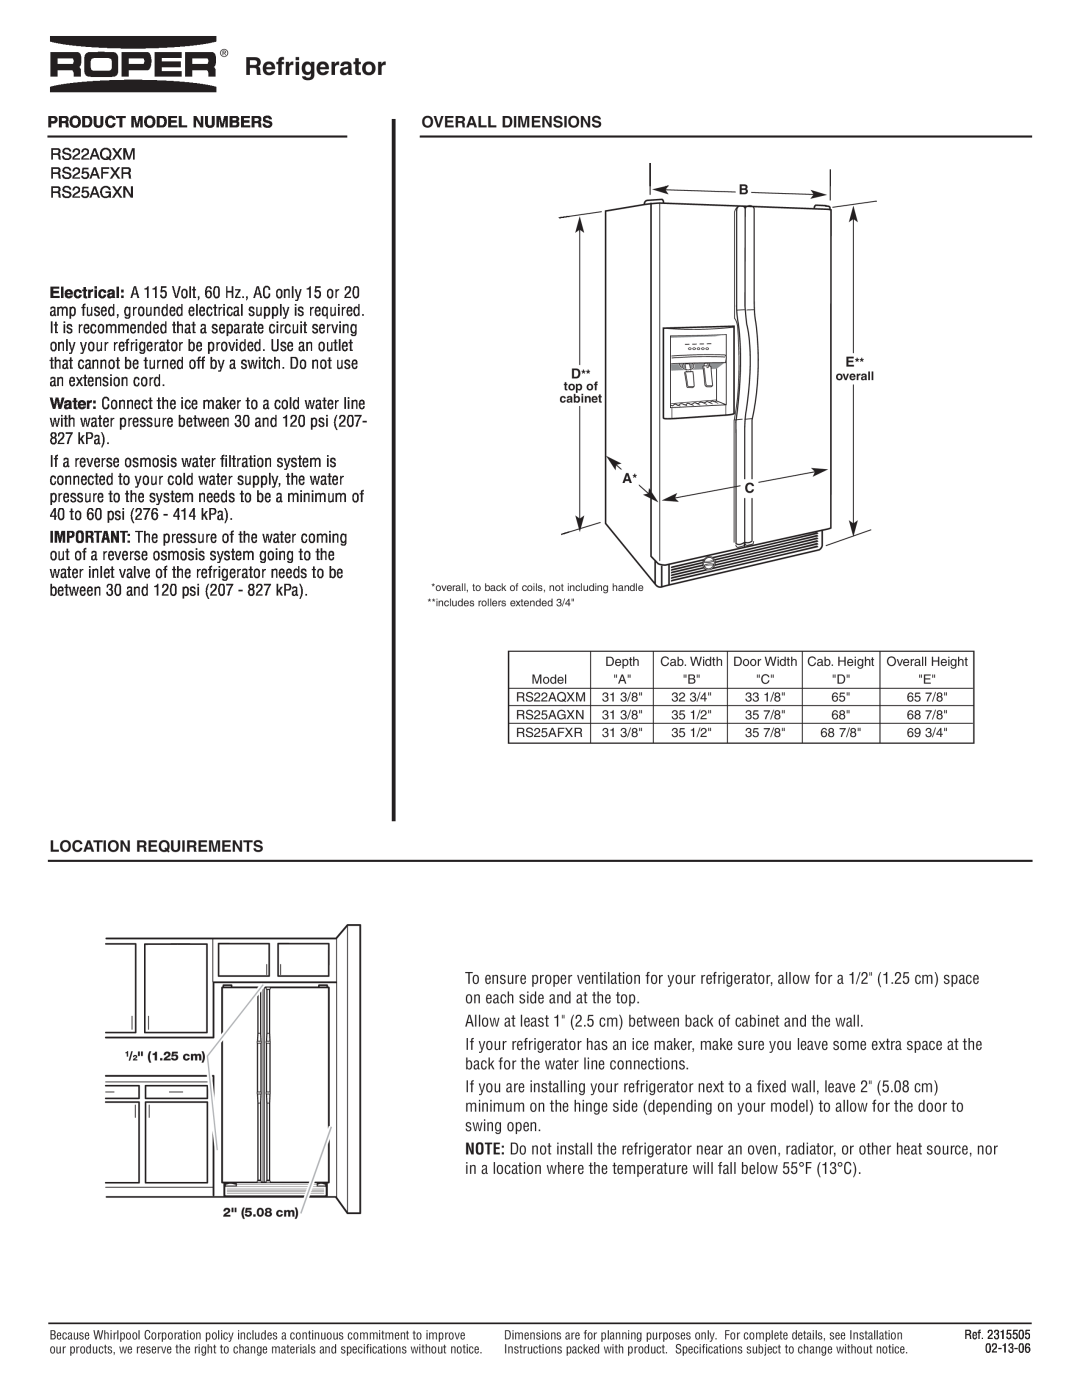 Roper RS22AQXM, RS25AFXR dimensions Refrigerator, Product Model Numbers, Overall Dimensions, Location Requirements 